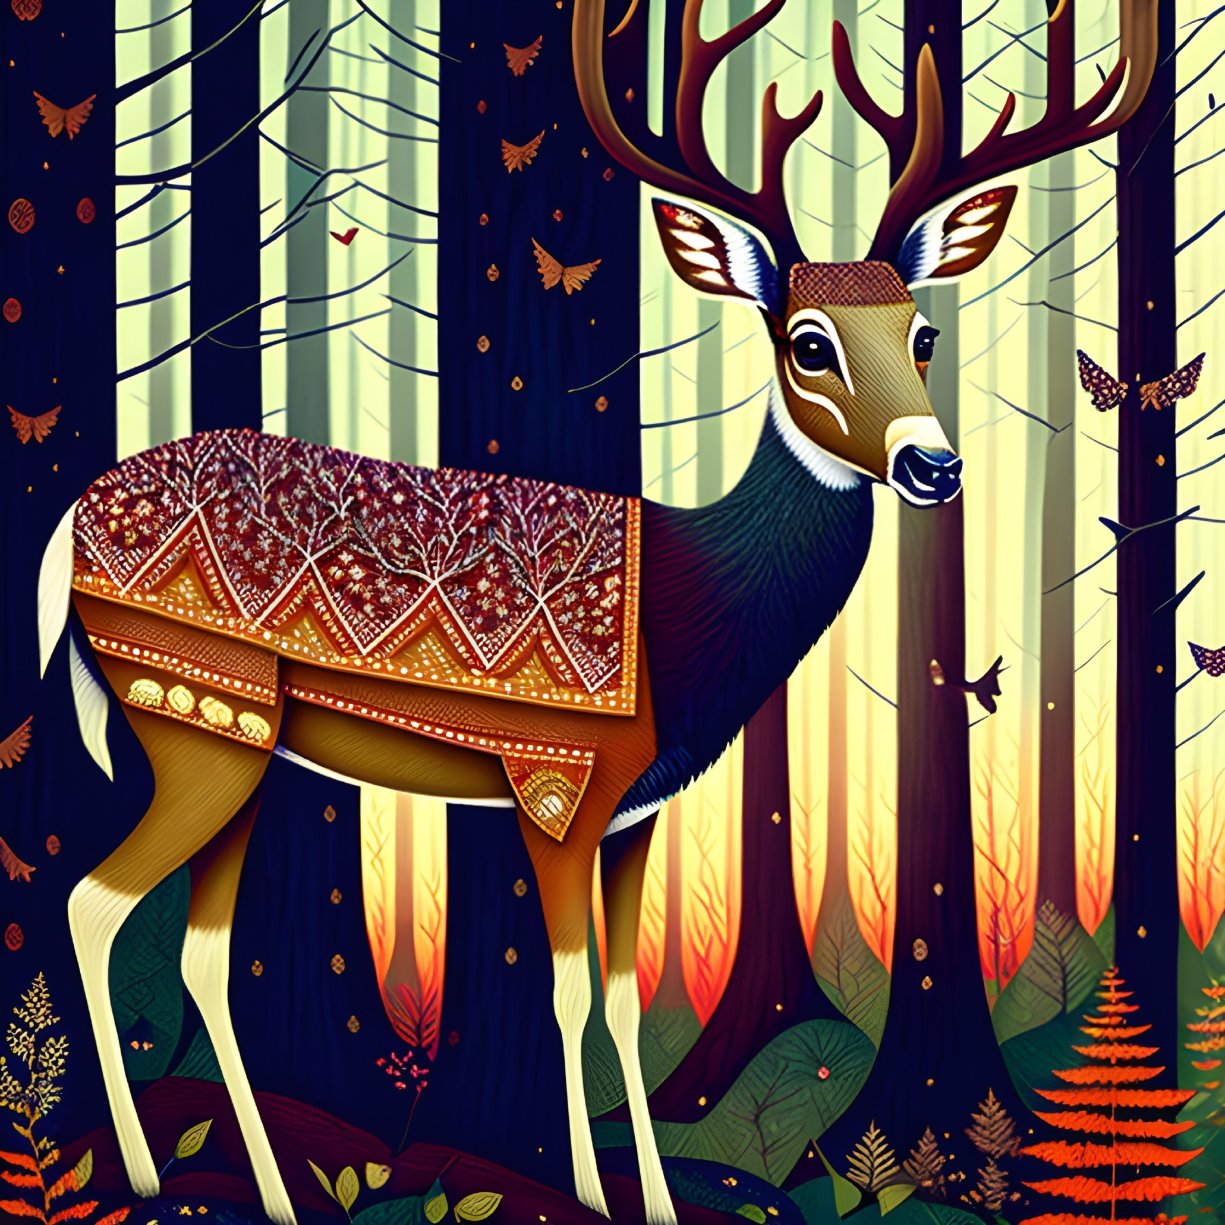 Stylized deer with ornate patterns in colorful forest